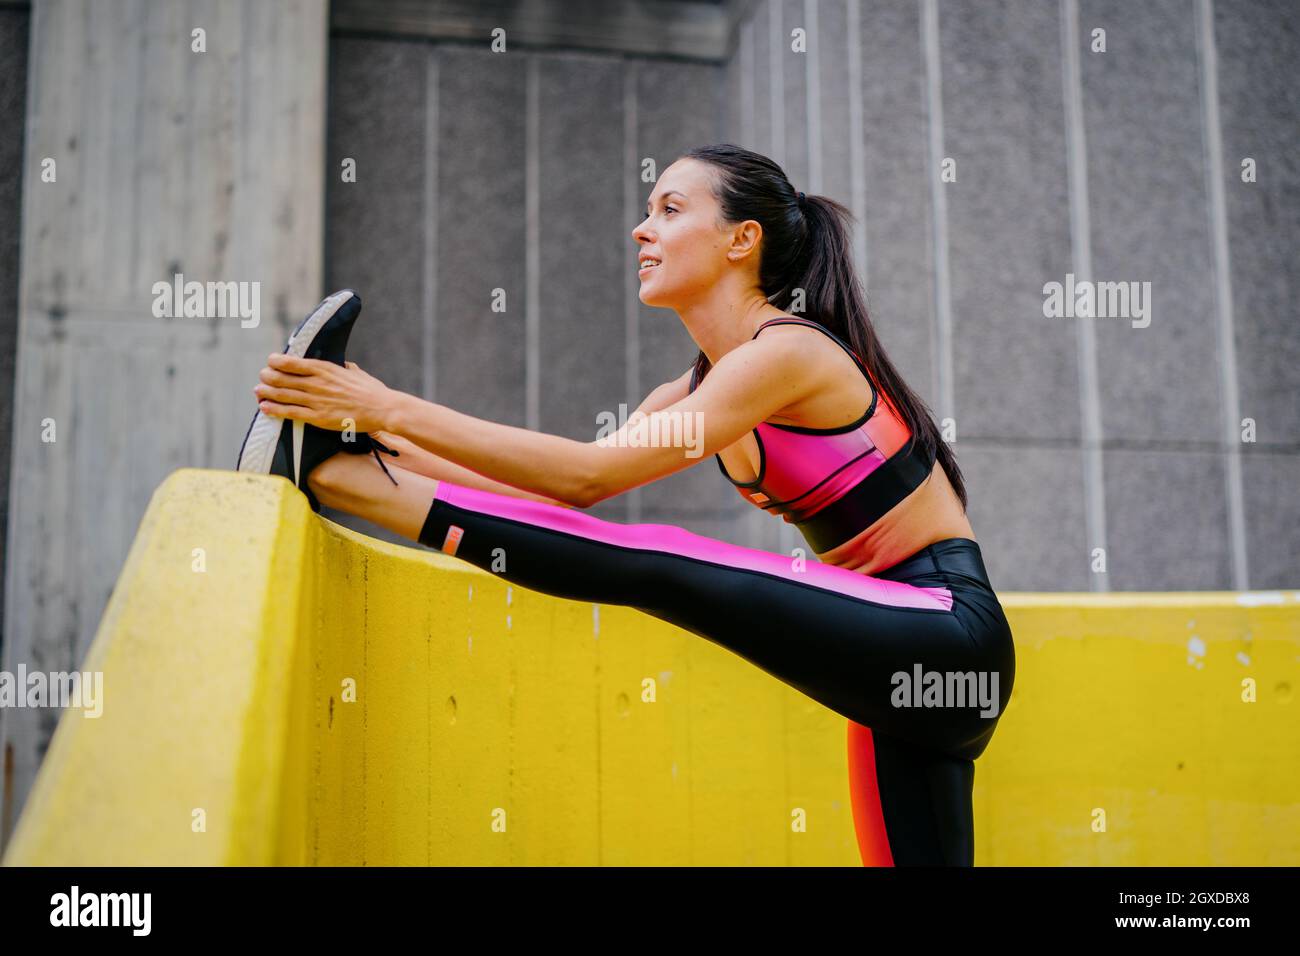 An athletic woman in a pink sports outfit stretching before a workout in an urban environment Stock Photo